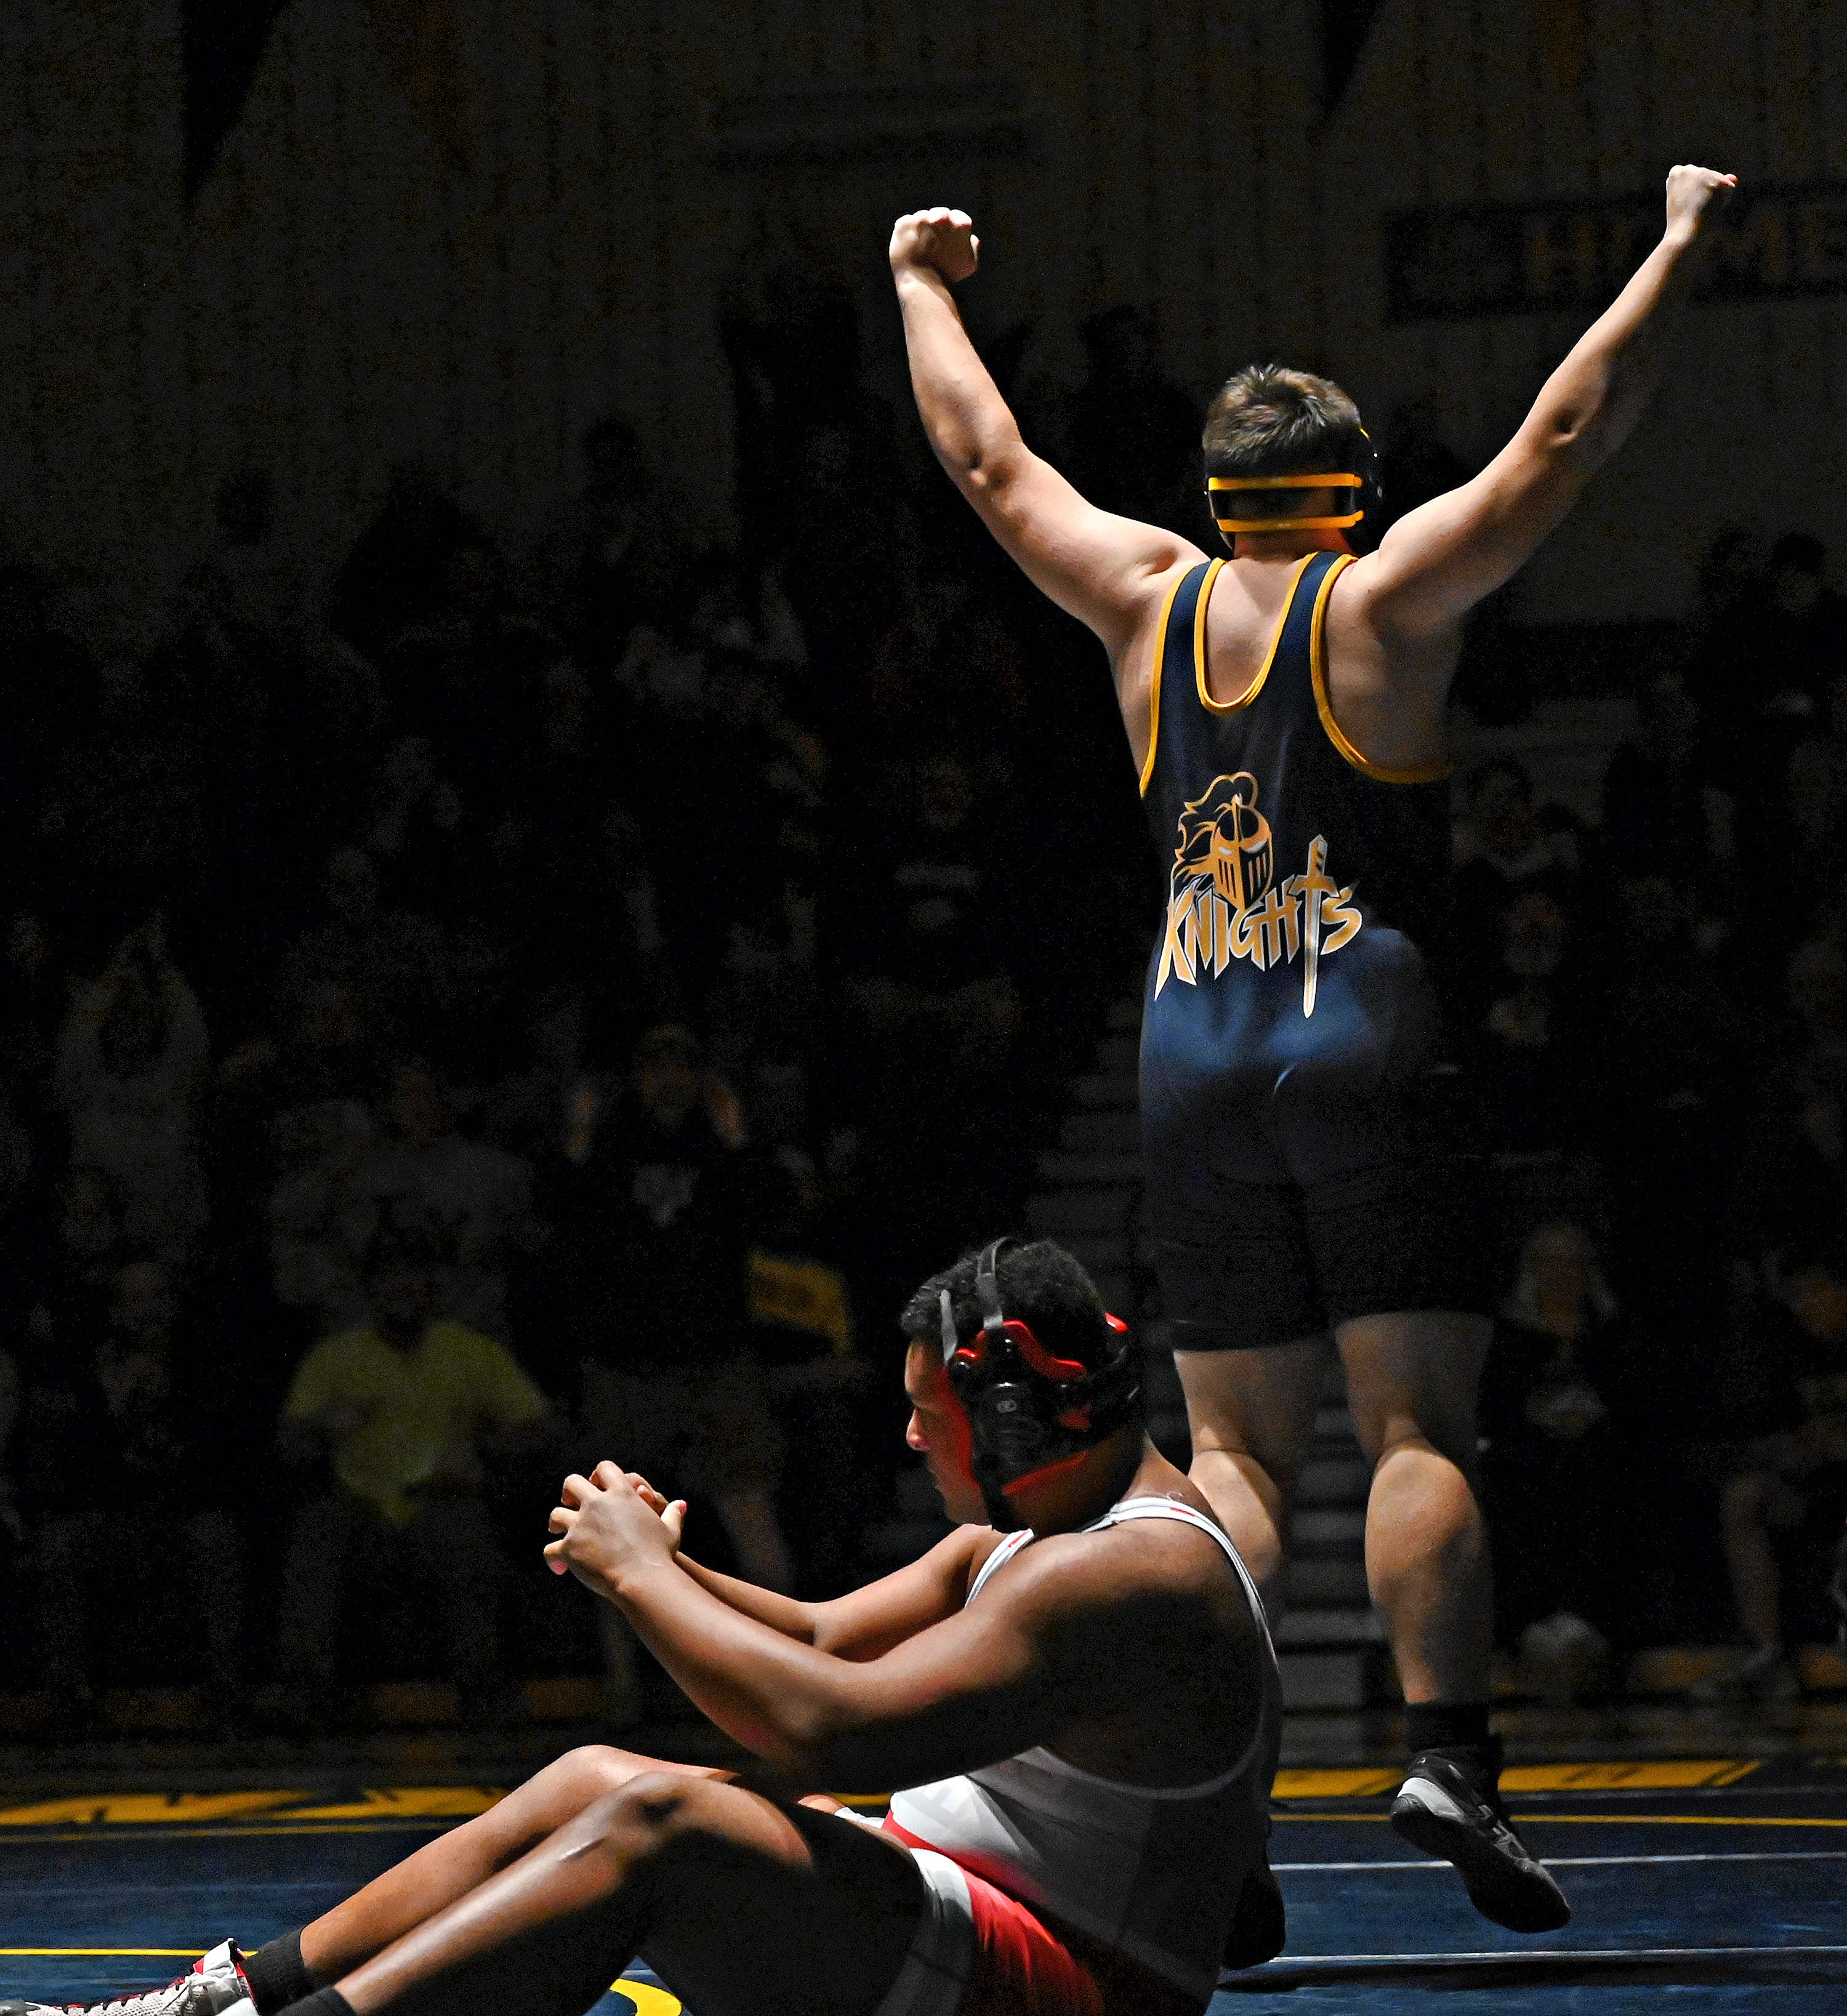 Eastern York’s Bryce Myers, back, celebrates a win over Hamburg’s Charles Sheppard while competing in the 285-pound weight class during PIAA District 3, Class 2-A first round wrestling action at Eastern York High School in Lower Windsor Township, Monday, Jan. 30, 2023. Myers would win with a pin at 0:35 and Eastern York would win the meet 50-22. Dawn J. Sagert photo